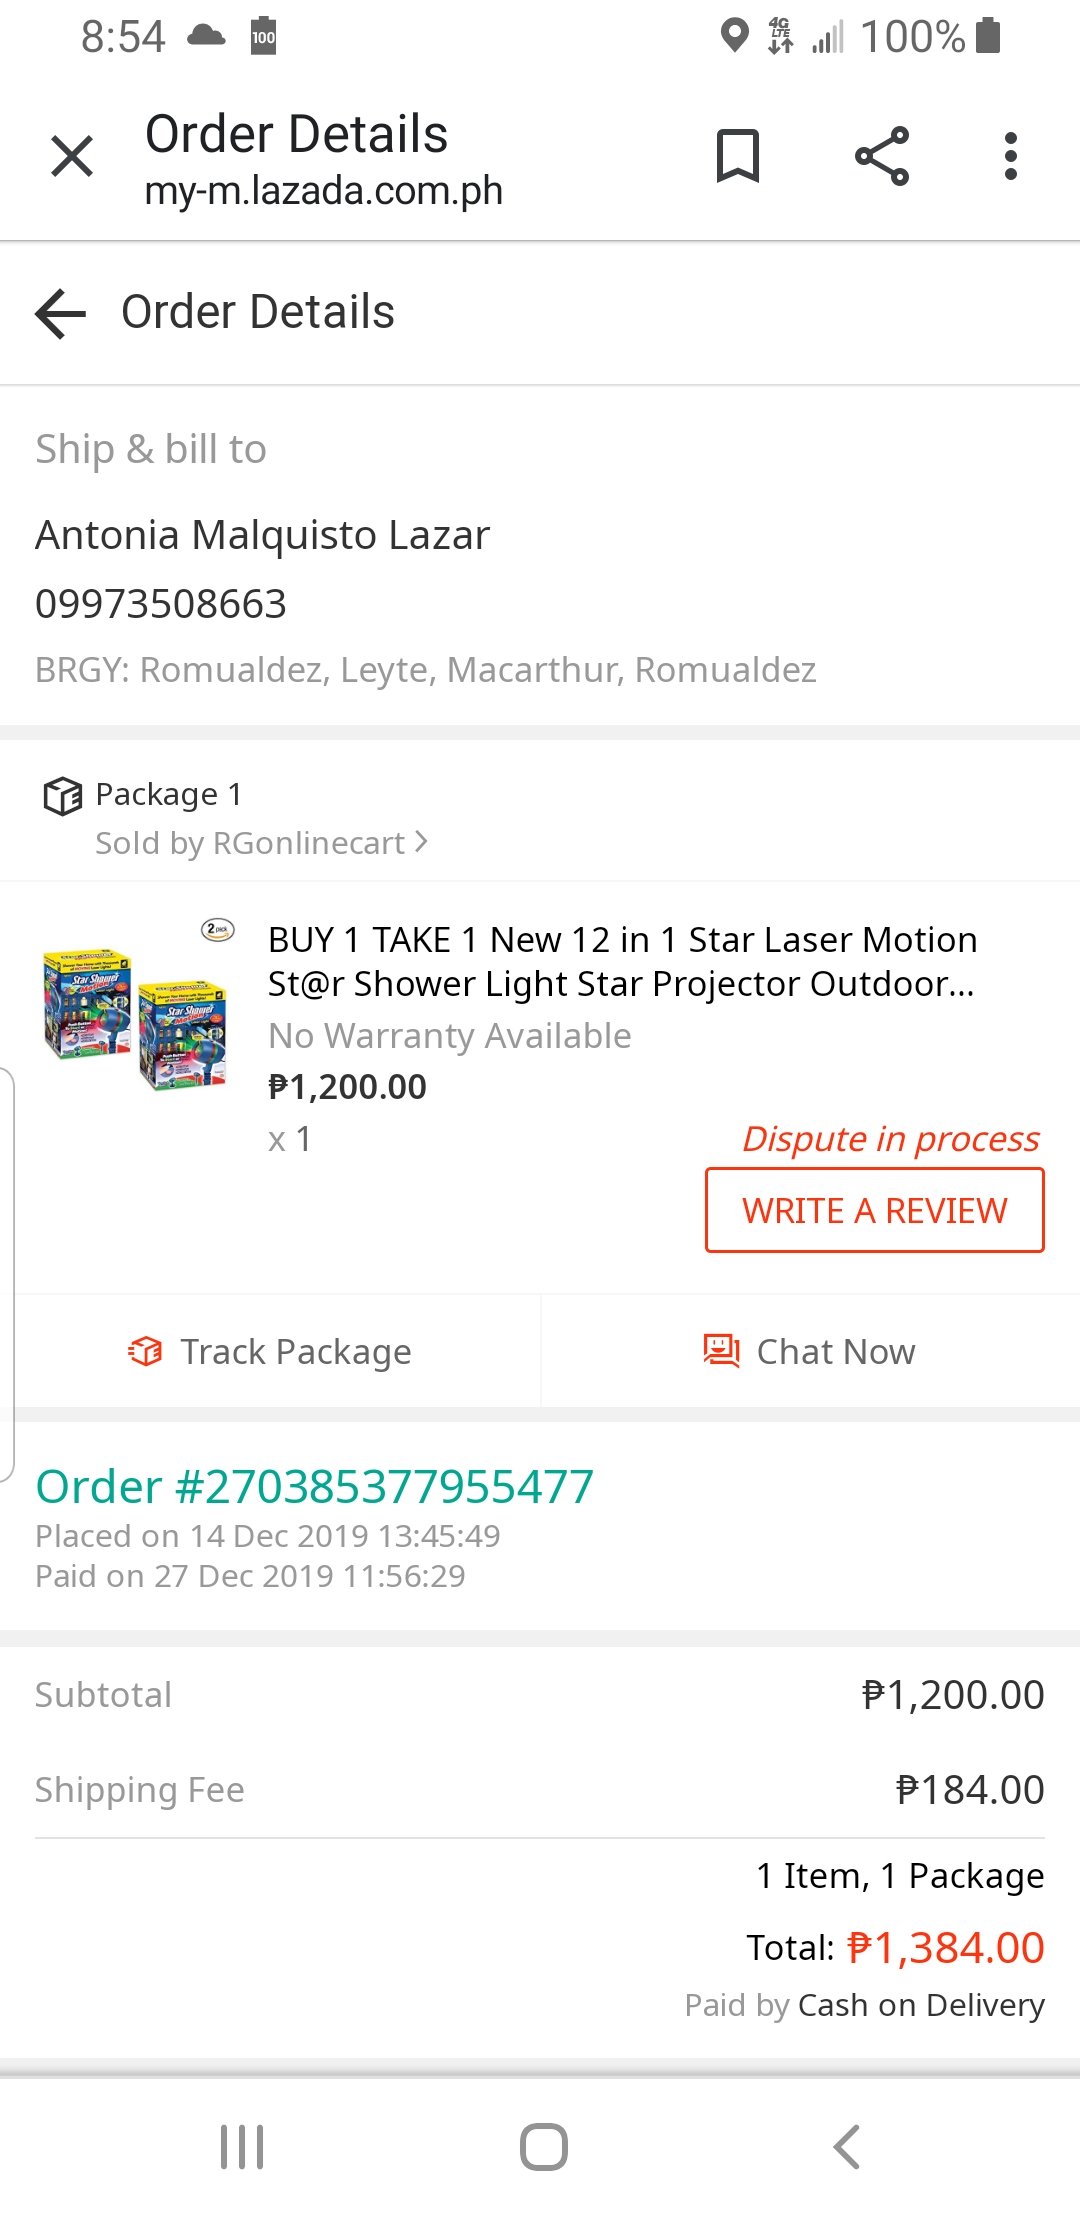 How To Cancel Order Lazada : Here's how to cancel your lazada order ...